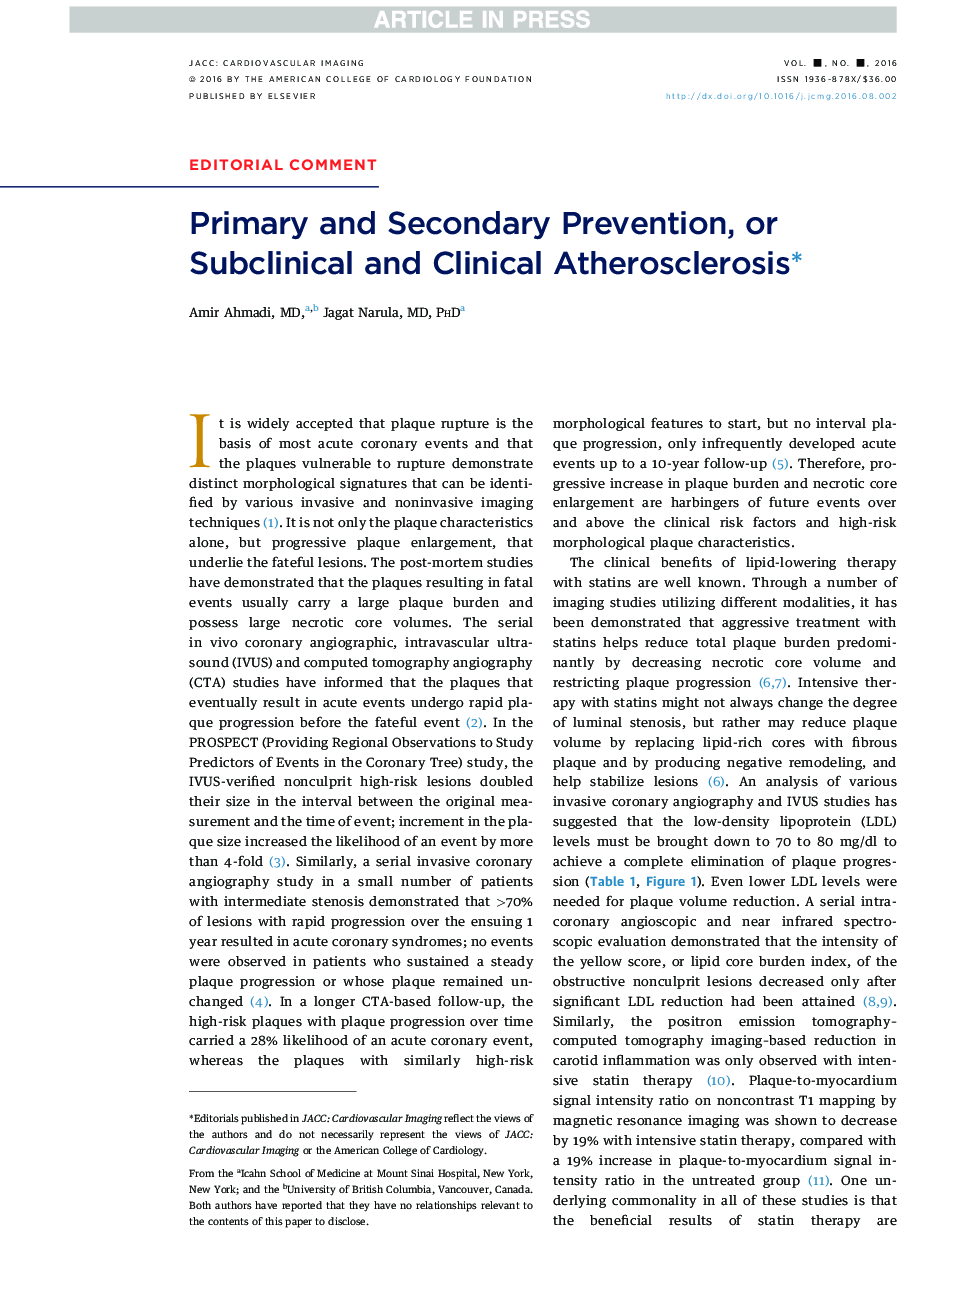 Primary and Secondary Prevention, or Subclinical and ClinicalÂ Atherosclerosisâ